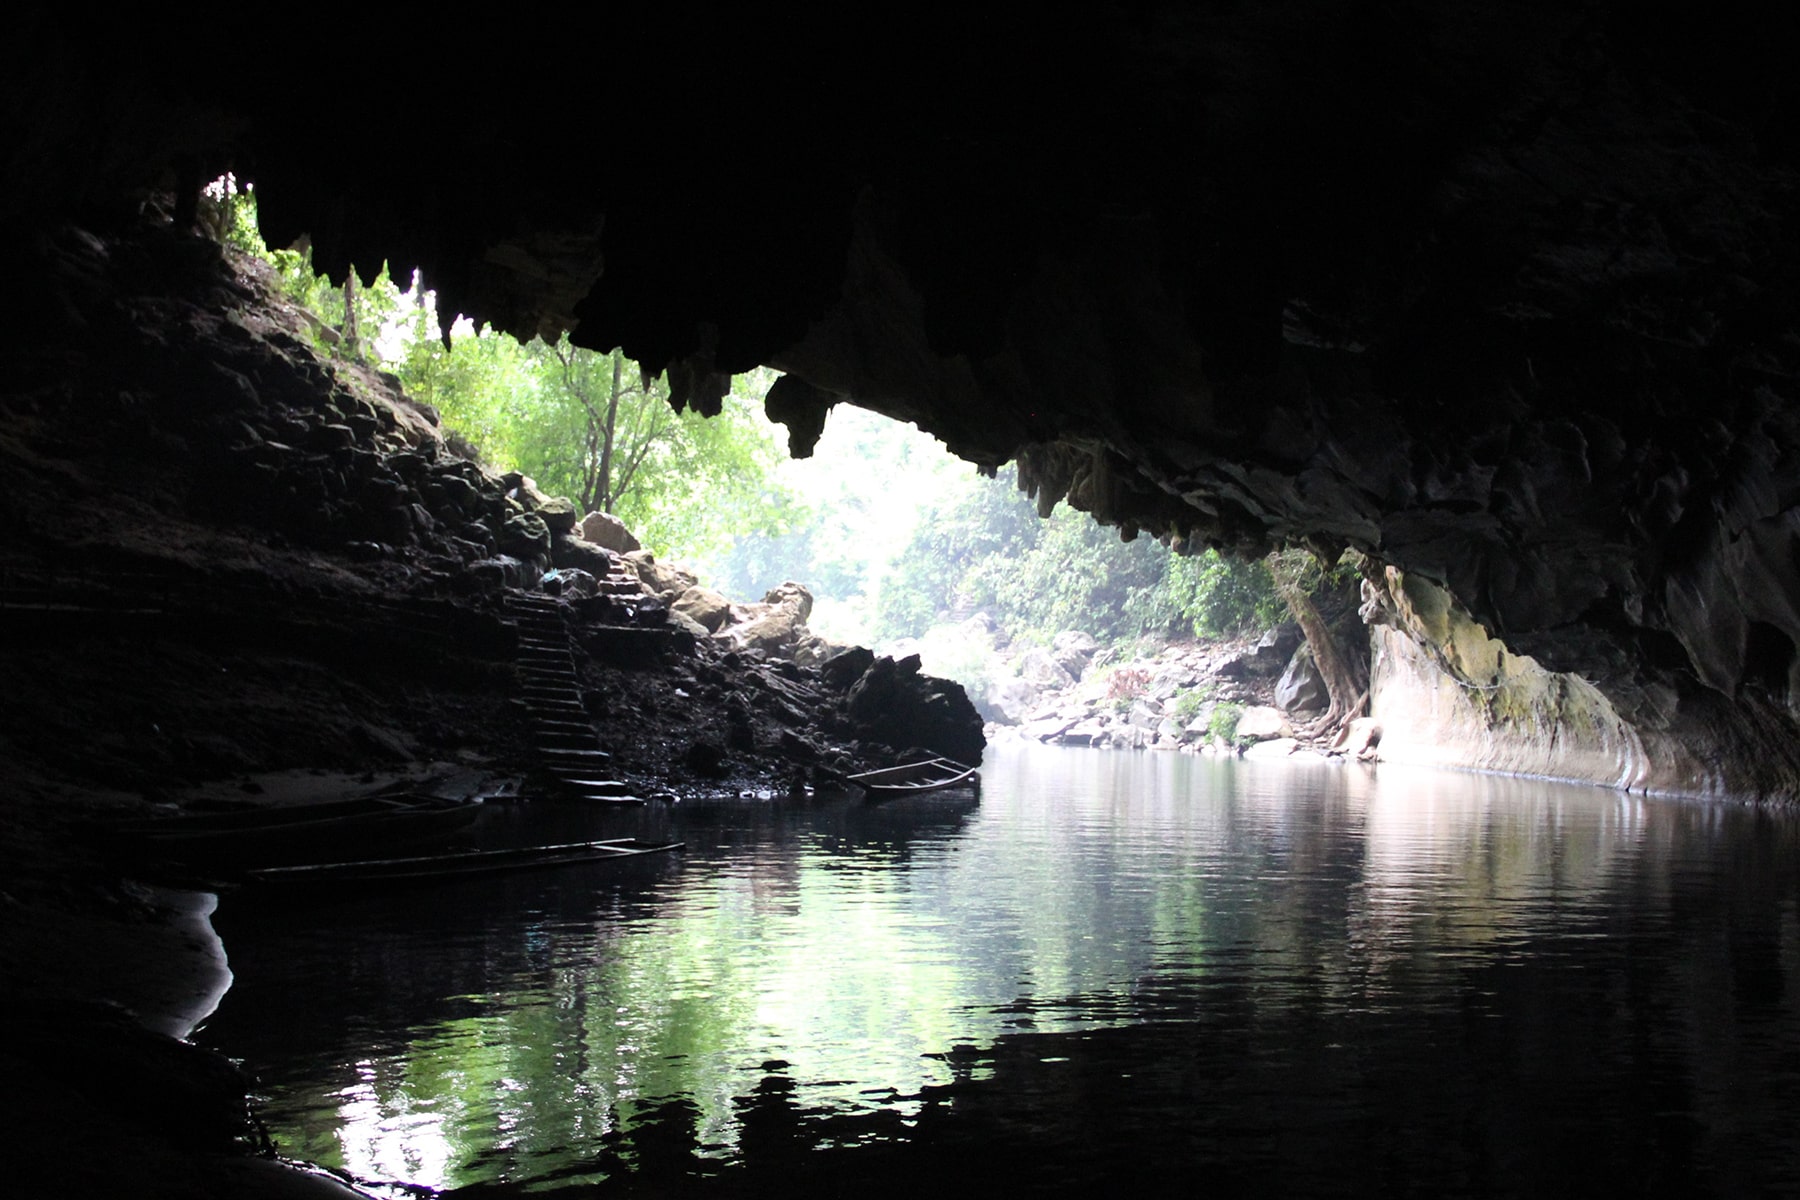 Entrance to the Tham Kong Lor cave seen from inside, Laos